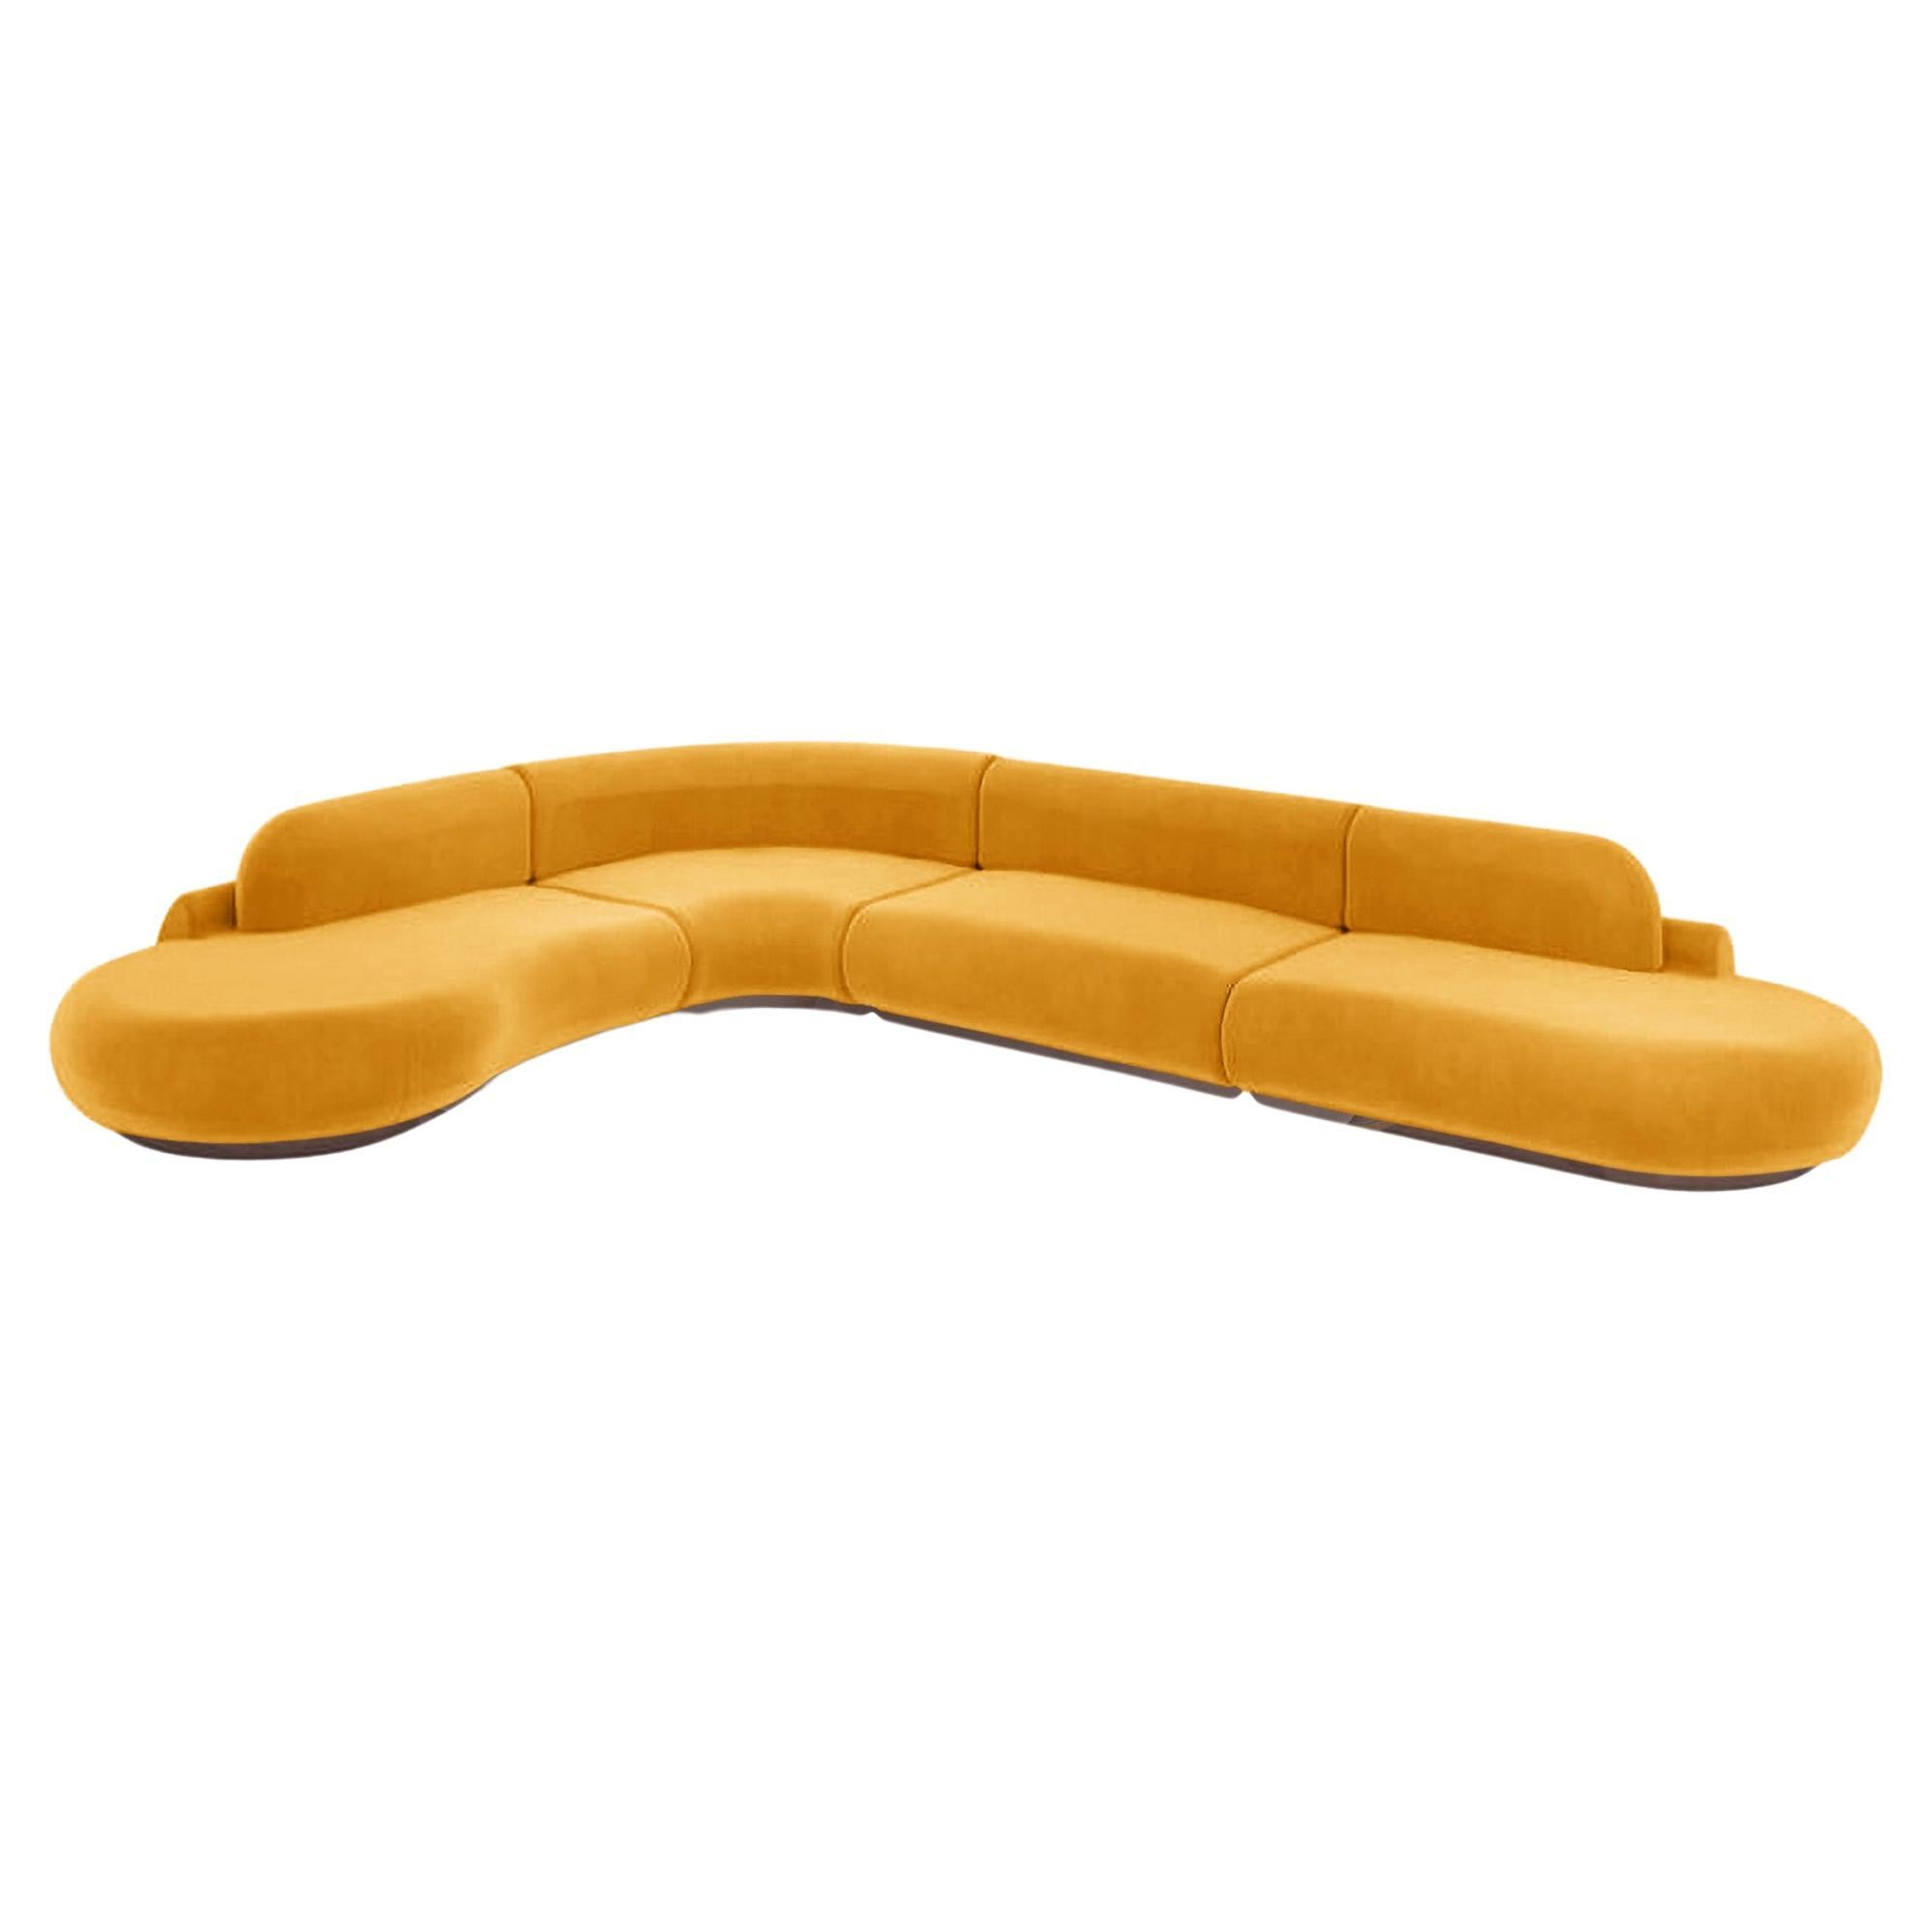 Naked Curved Sectional Sofa, 4 Piece with Beech Ash-056-1 and Corn